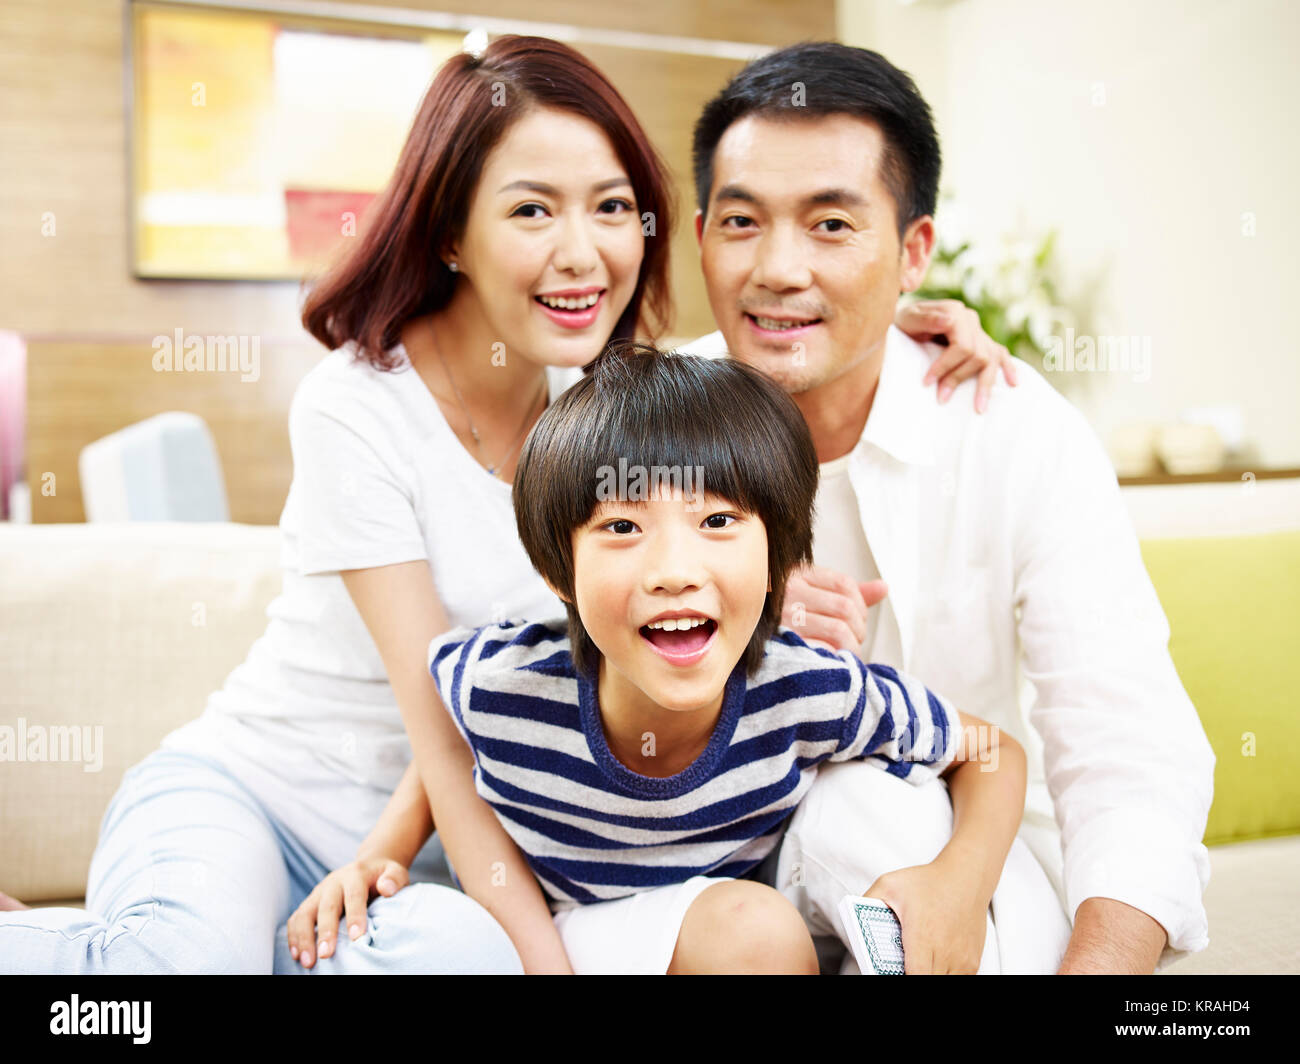 portrait of a happy asian family mother father and son sitting on couch at home looking at camera smiling. Stock Photo